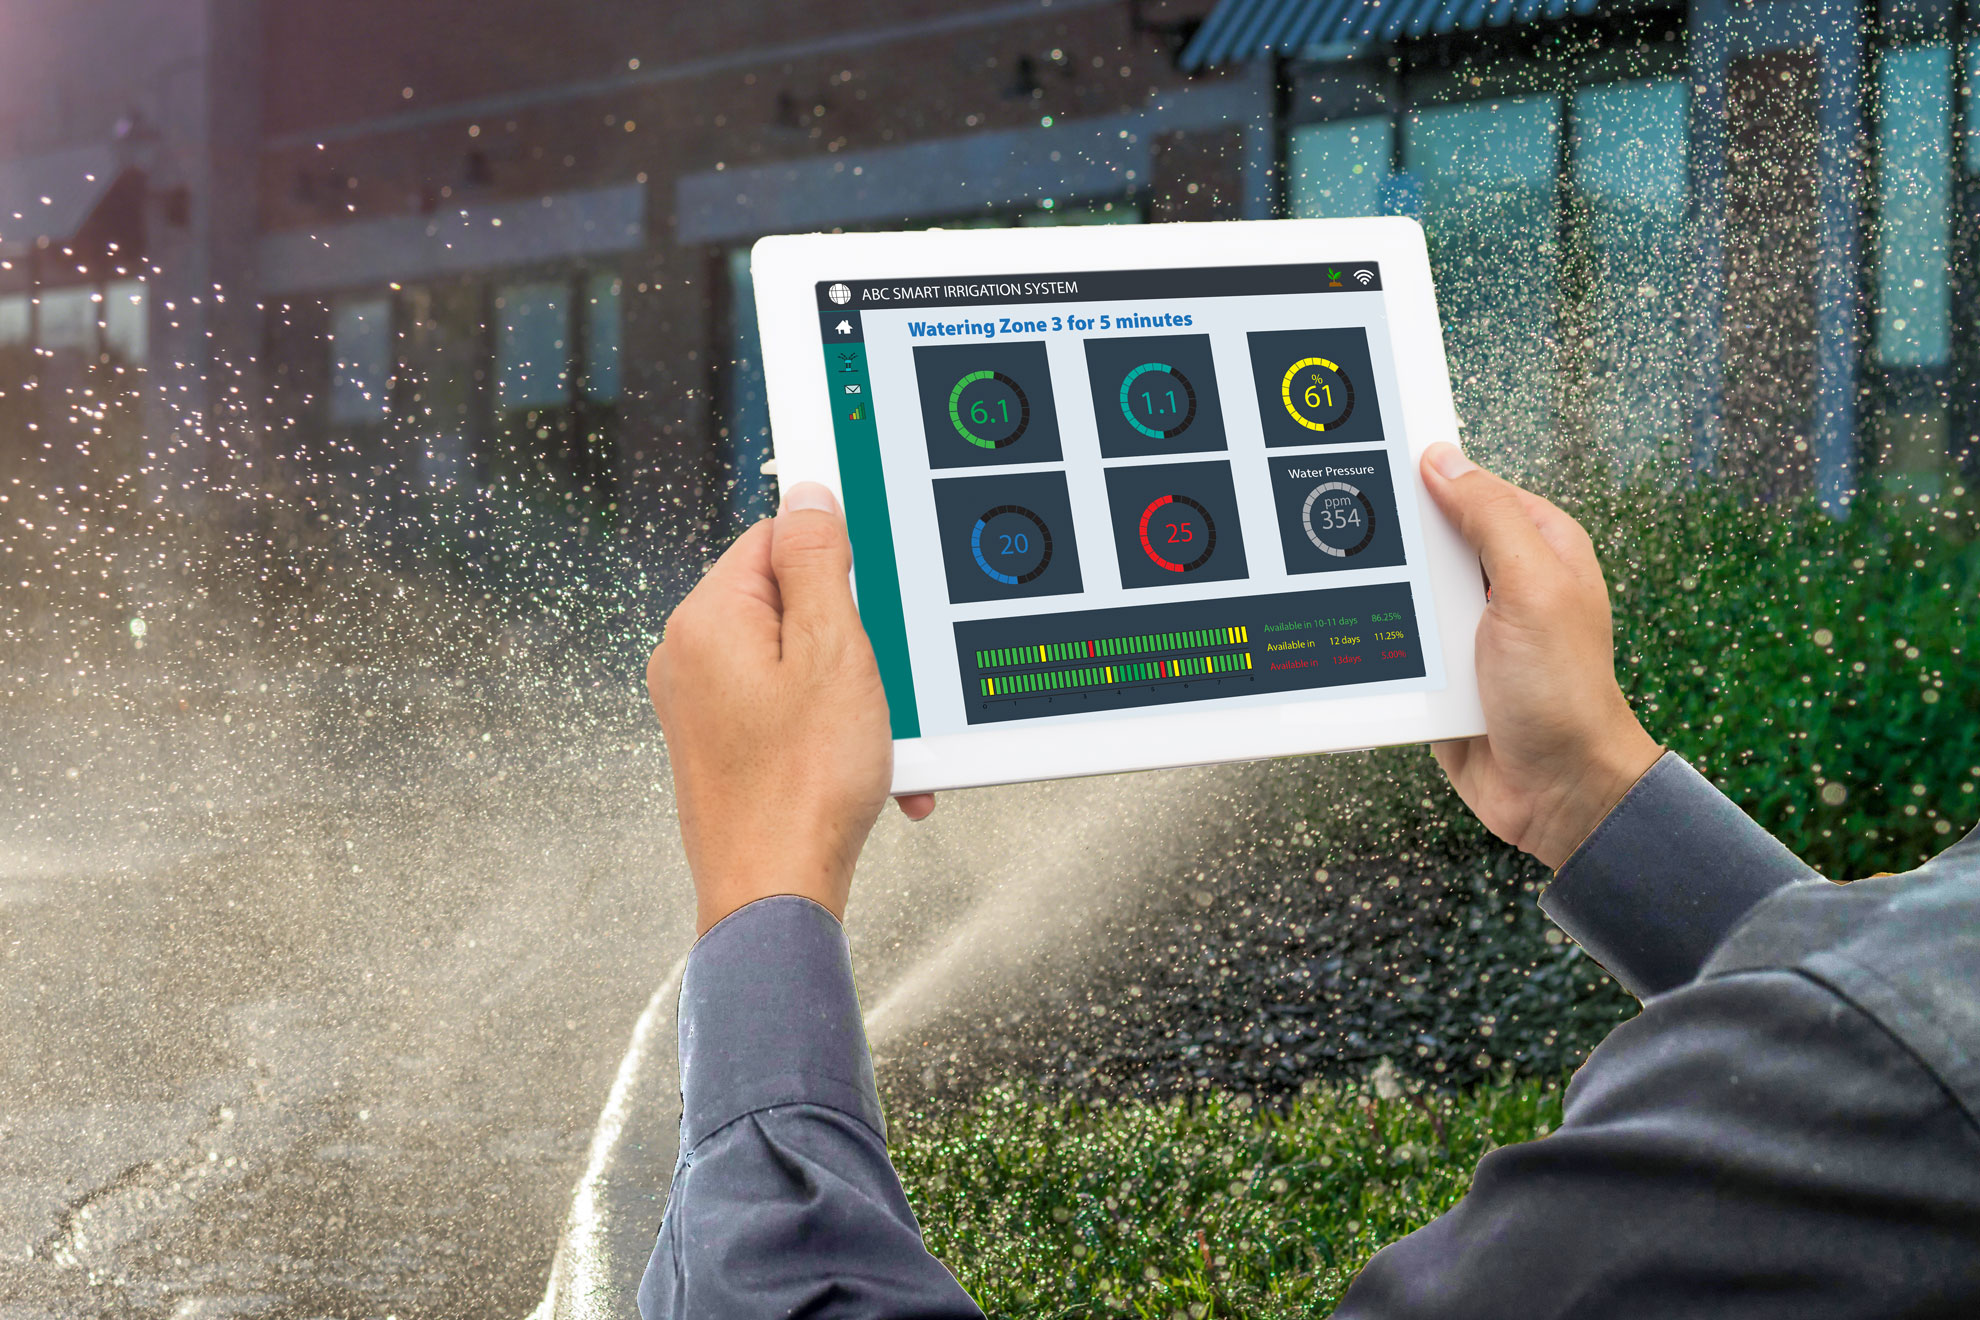 commercial-smart-irrigation-system-rebate-application-garden-style